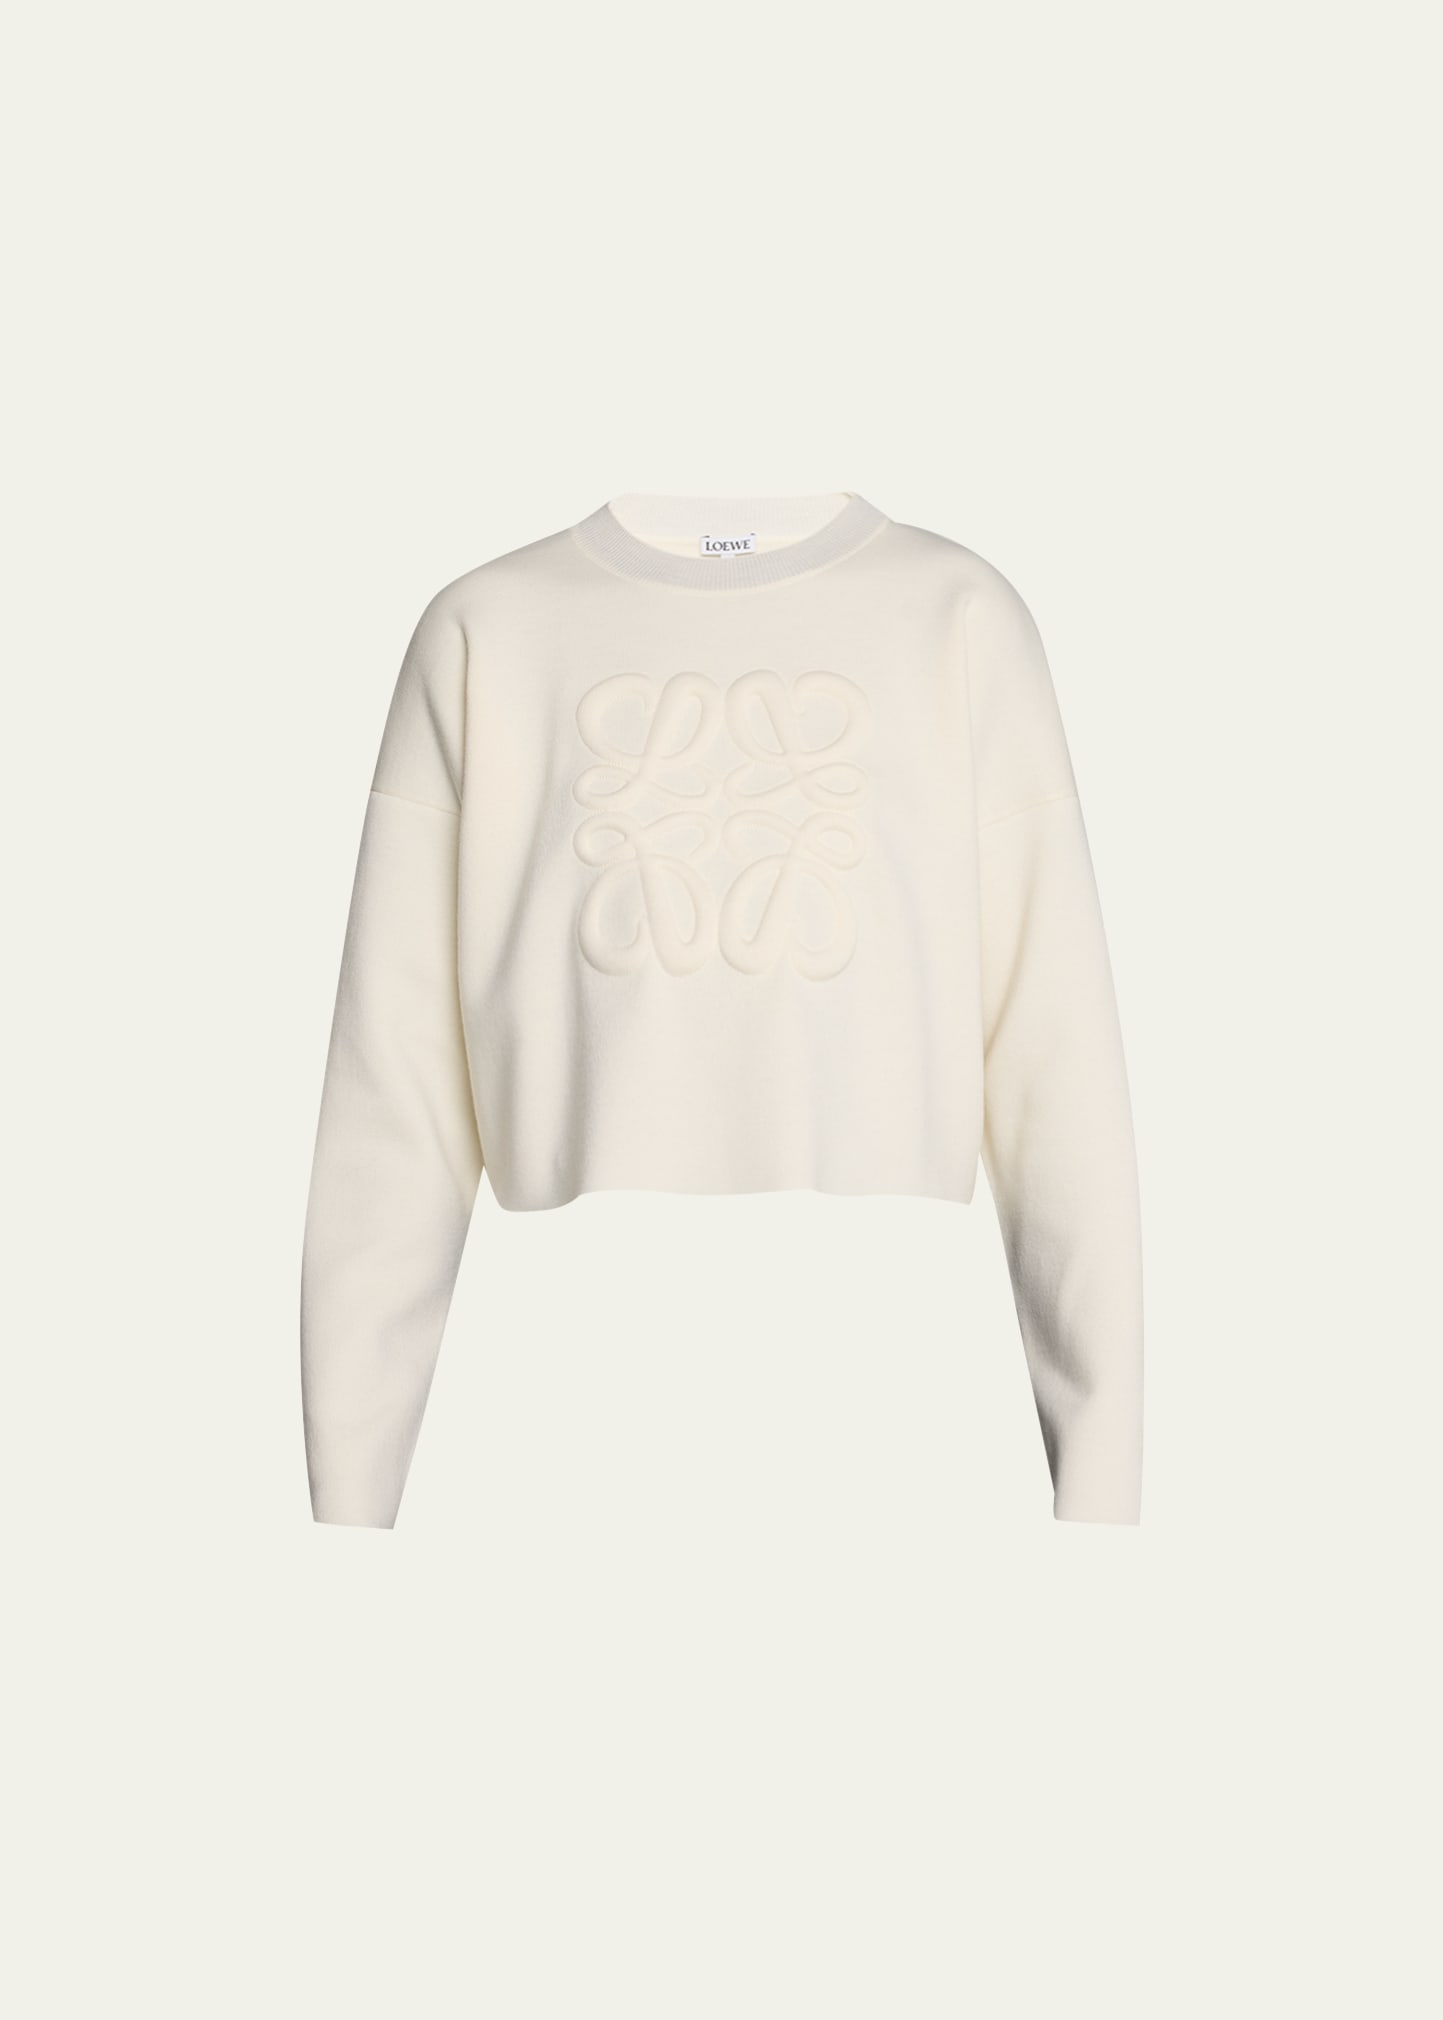 Loewe Short Wool Sweater With Anagram Detail In Camel